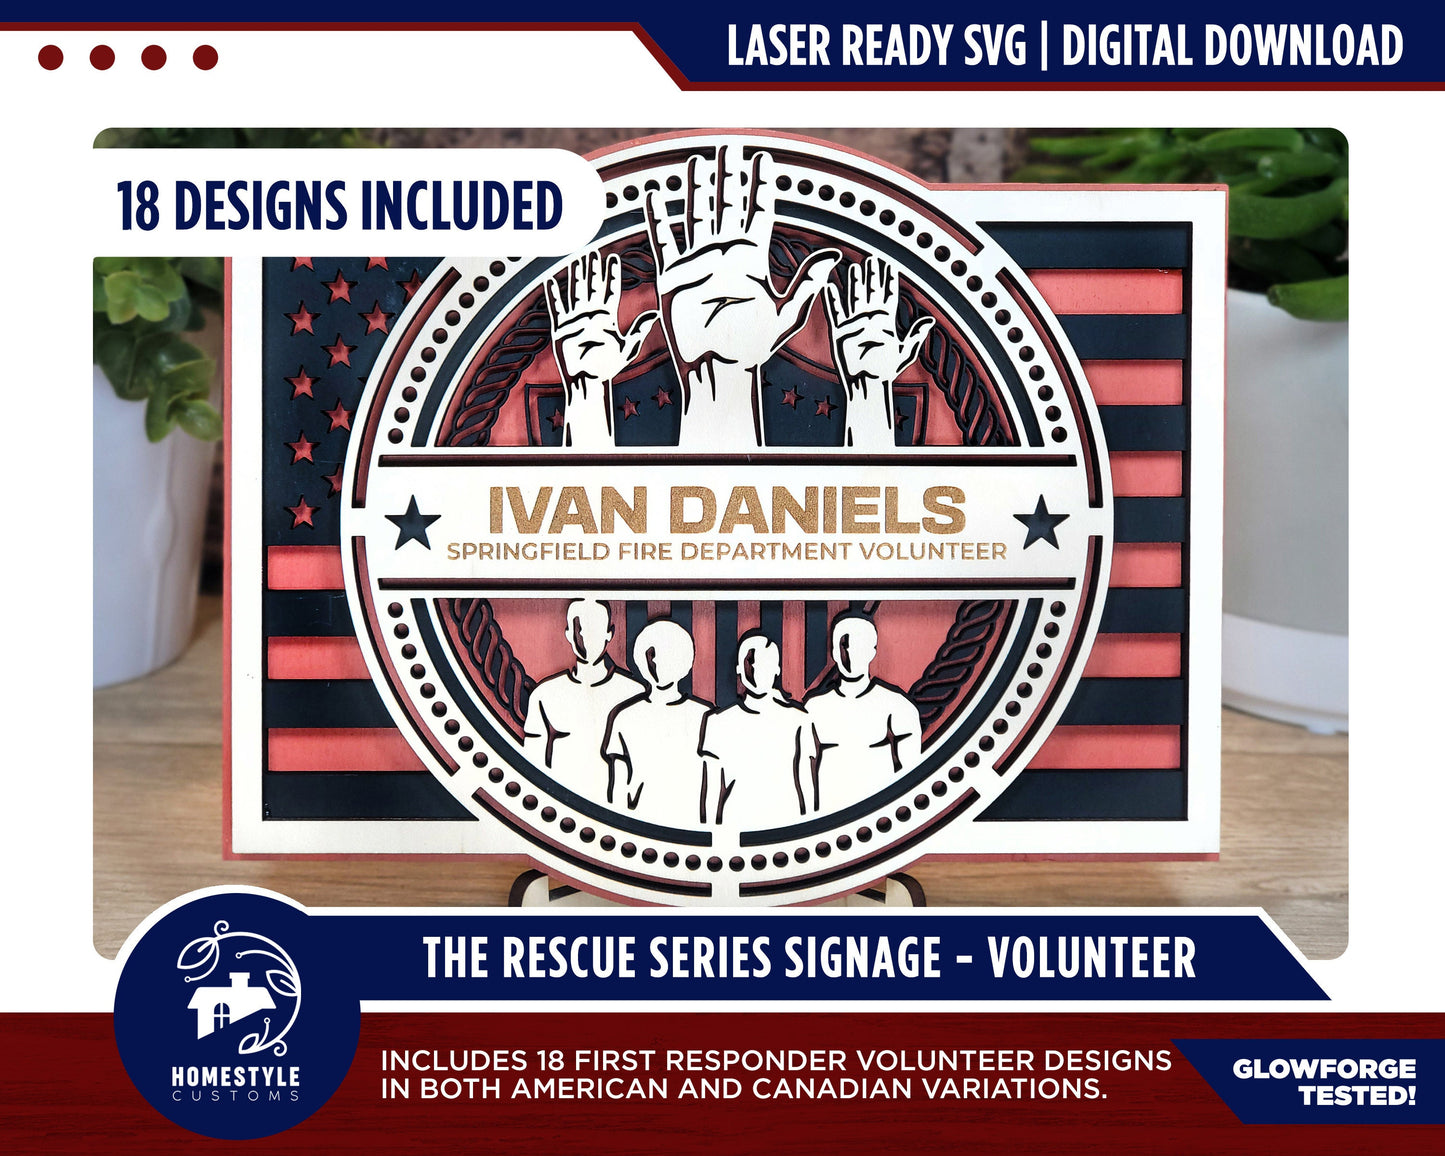 The Rescue Series Signage - Volunteer - 18 Designs - SVG File Download - Sized for Glowforge